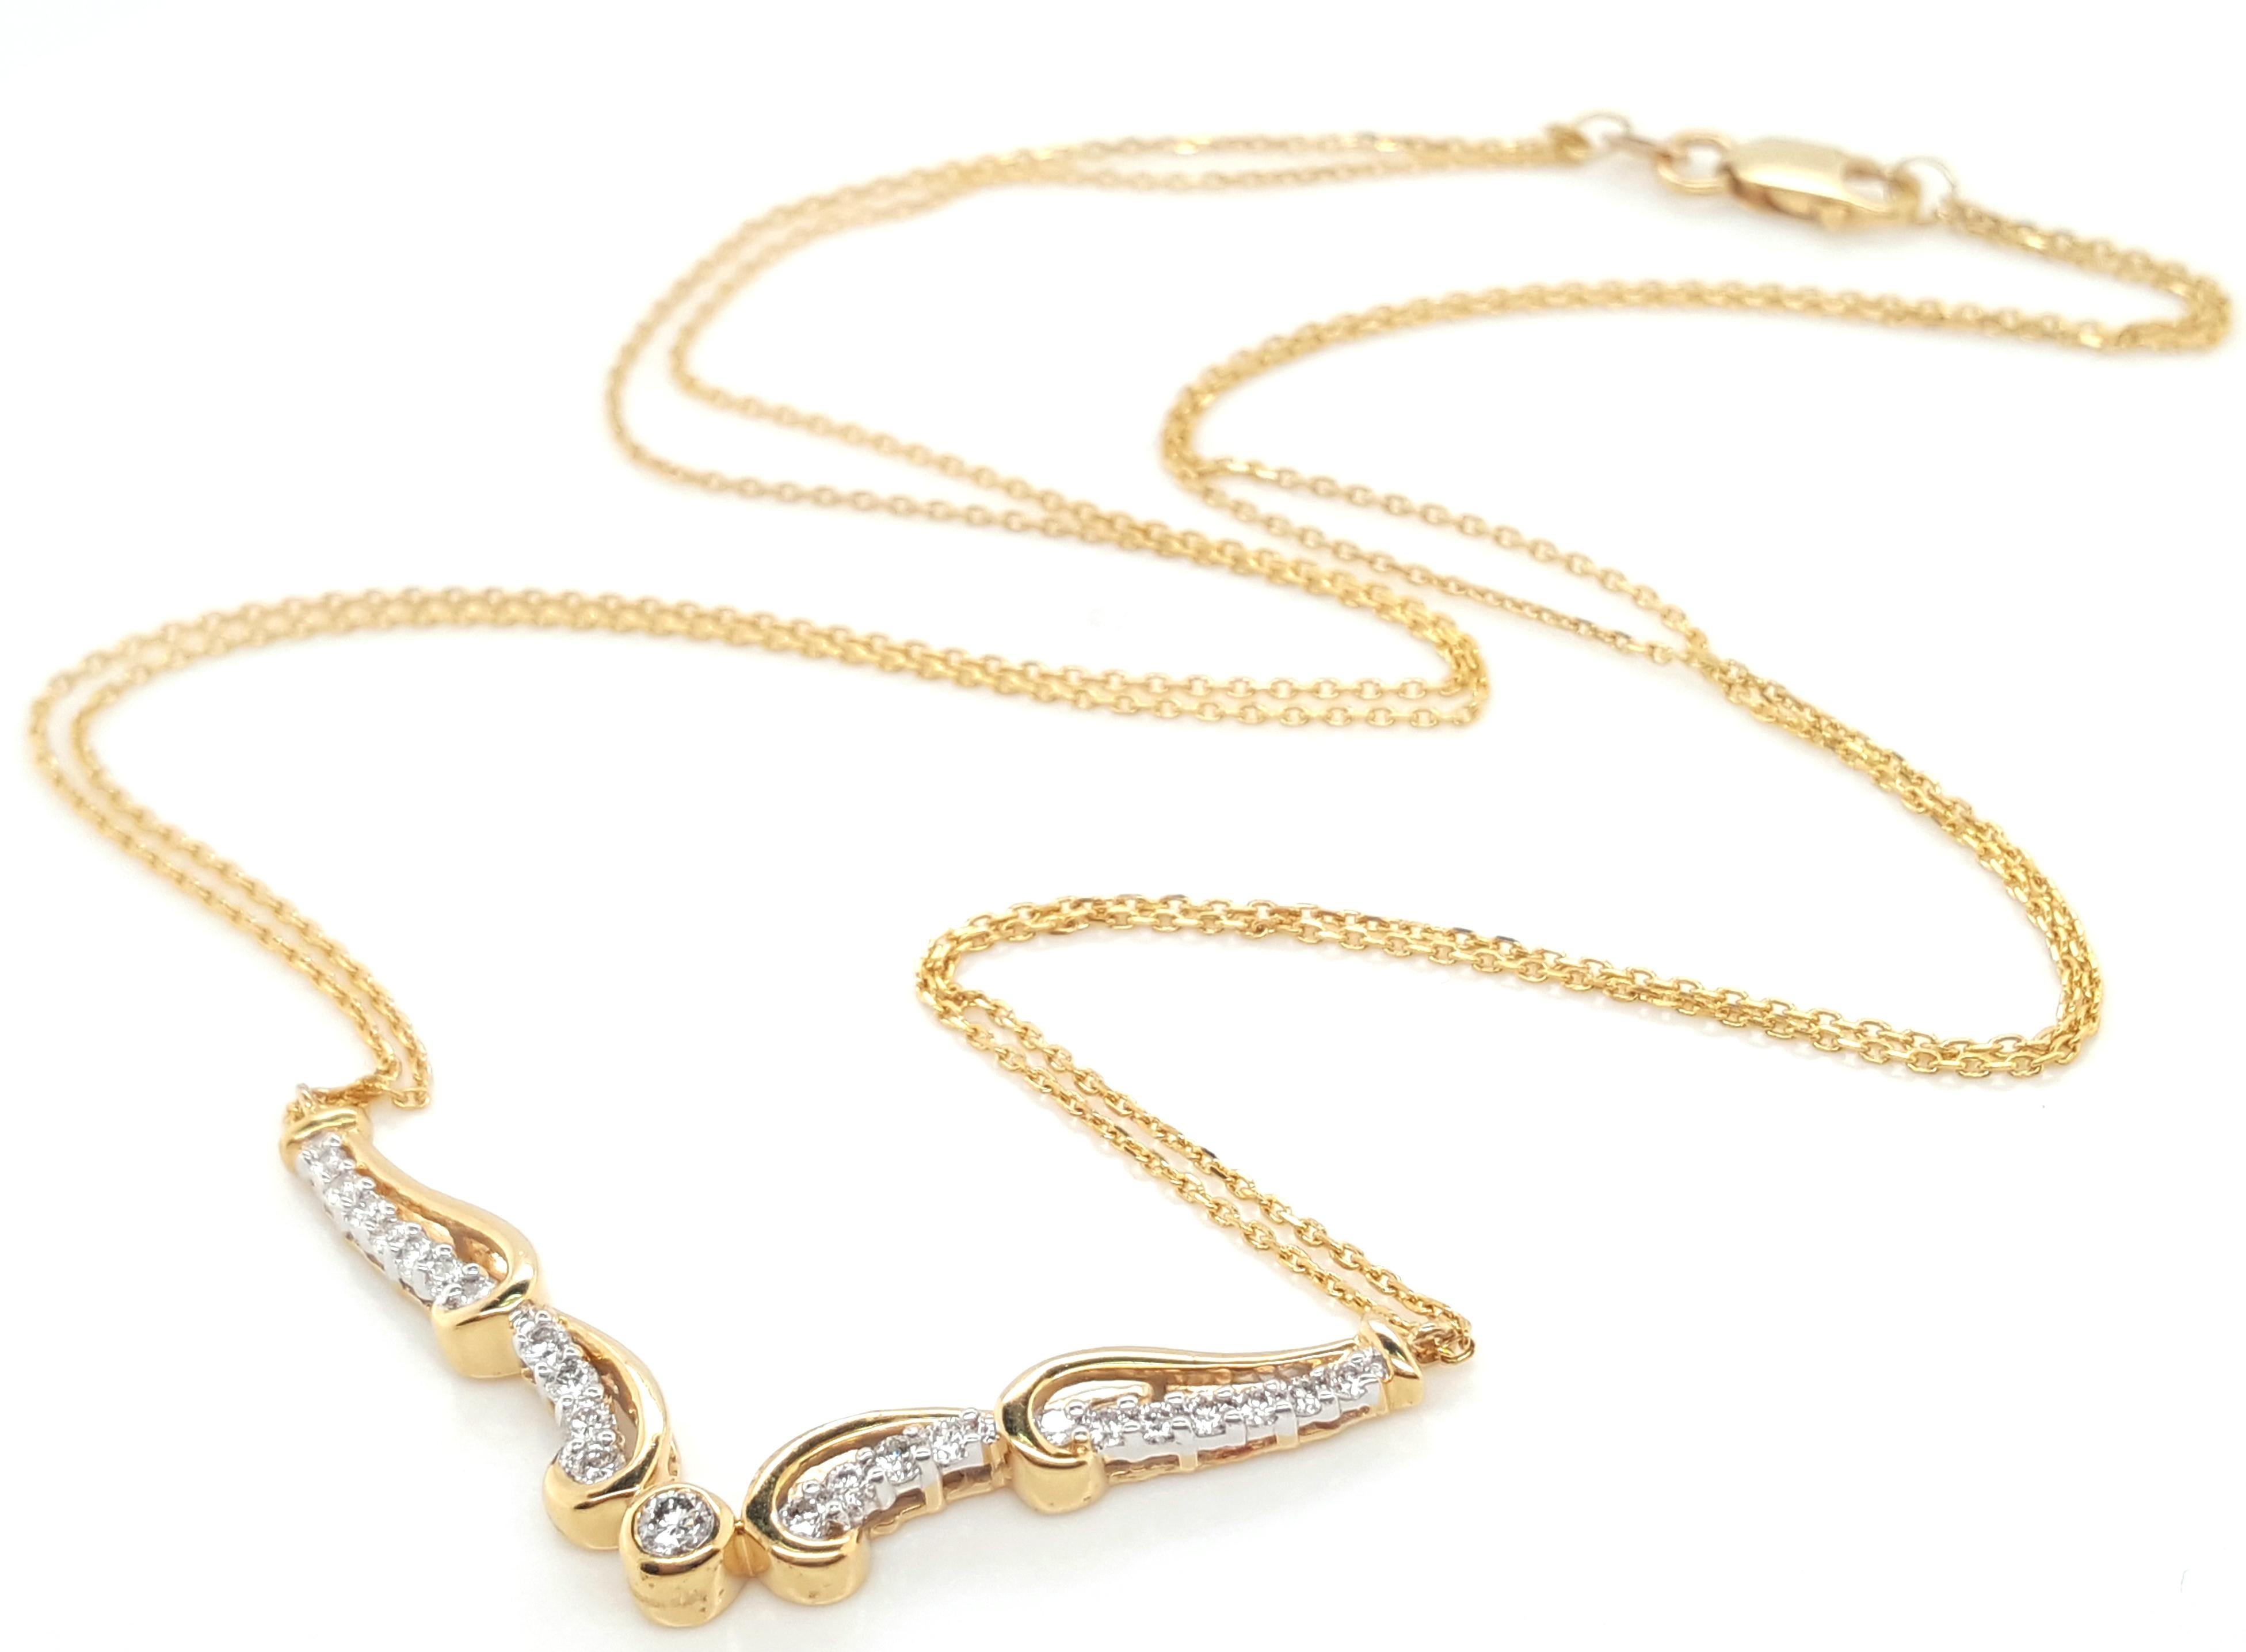  18 Karat Yellow Gold Diamond Necklace with Double Chain  The classically stunning necklace features  a V-shaped line of diamonds suspended by two delicate 18 karat yellow gold link chains with a lobster claw clasp. There are 23 full cut round